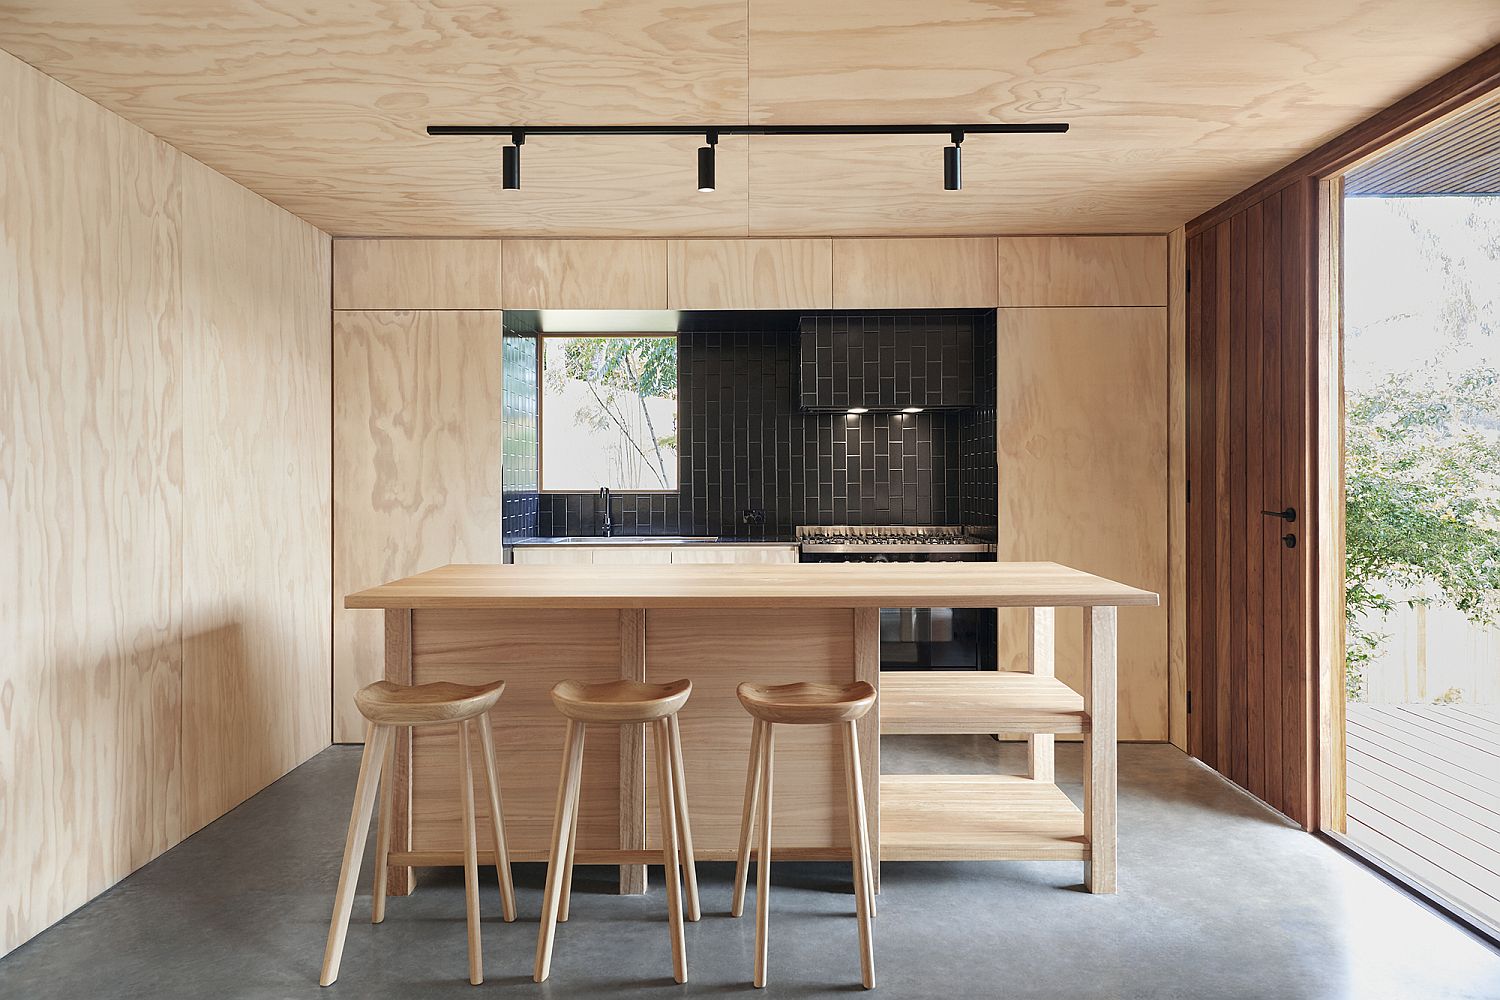 Plywood-walls-for-the-kitchen-along-with-polished-concrete-floor